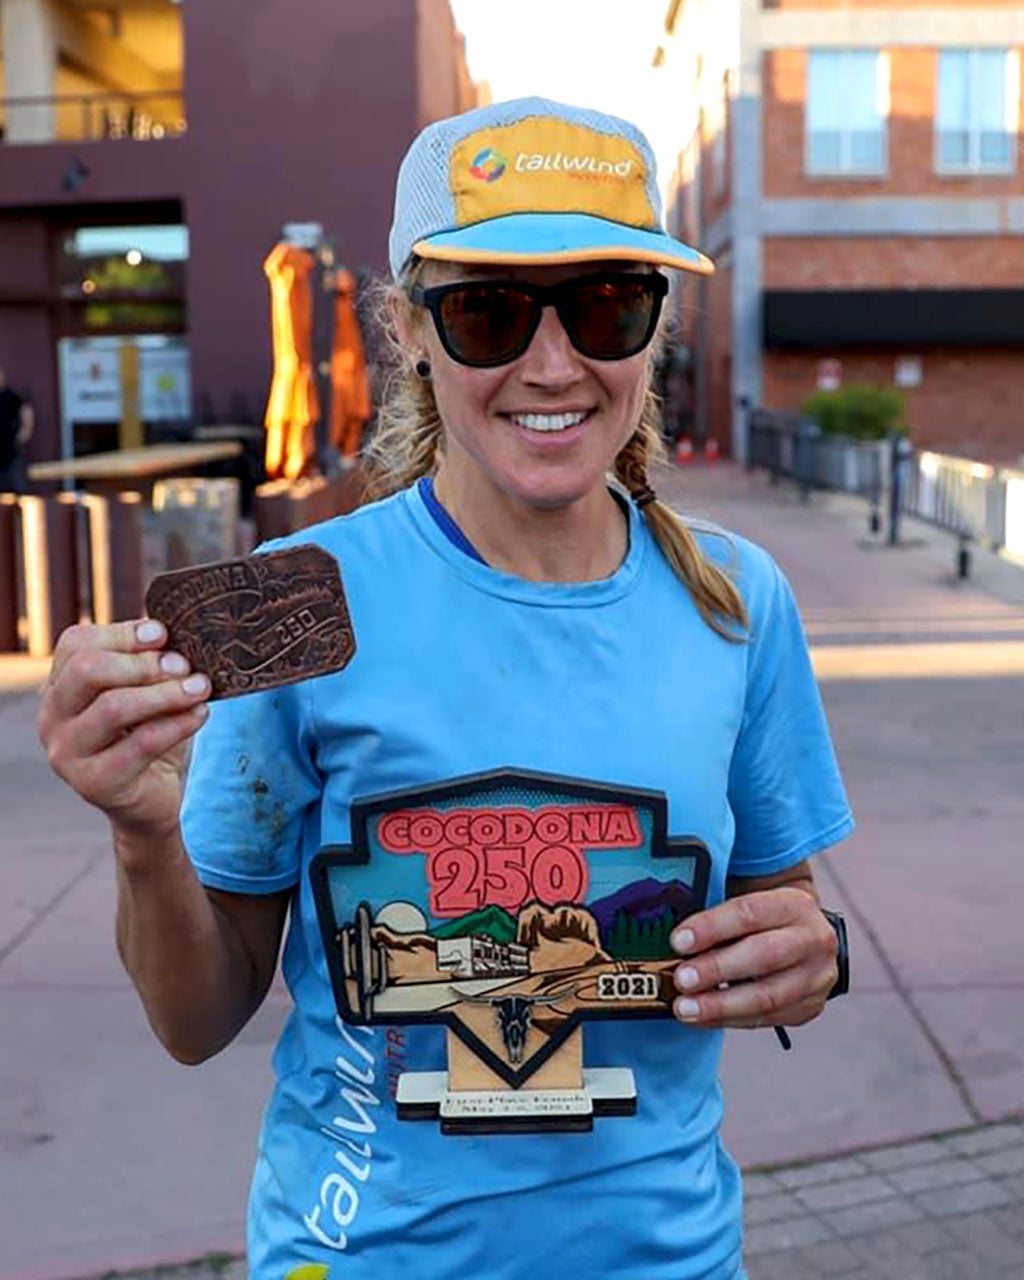 Maggie Guterl holding buckle and first place trophy for Aravaipa Cocodona 250 Ultramarathon